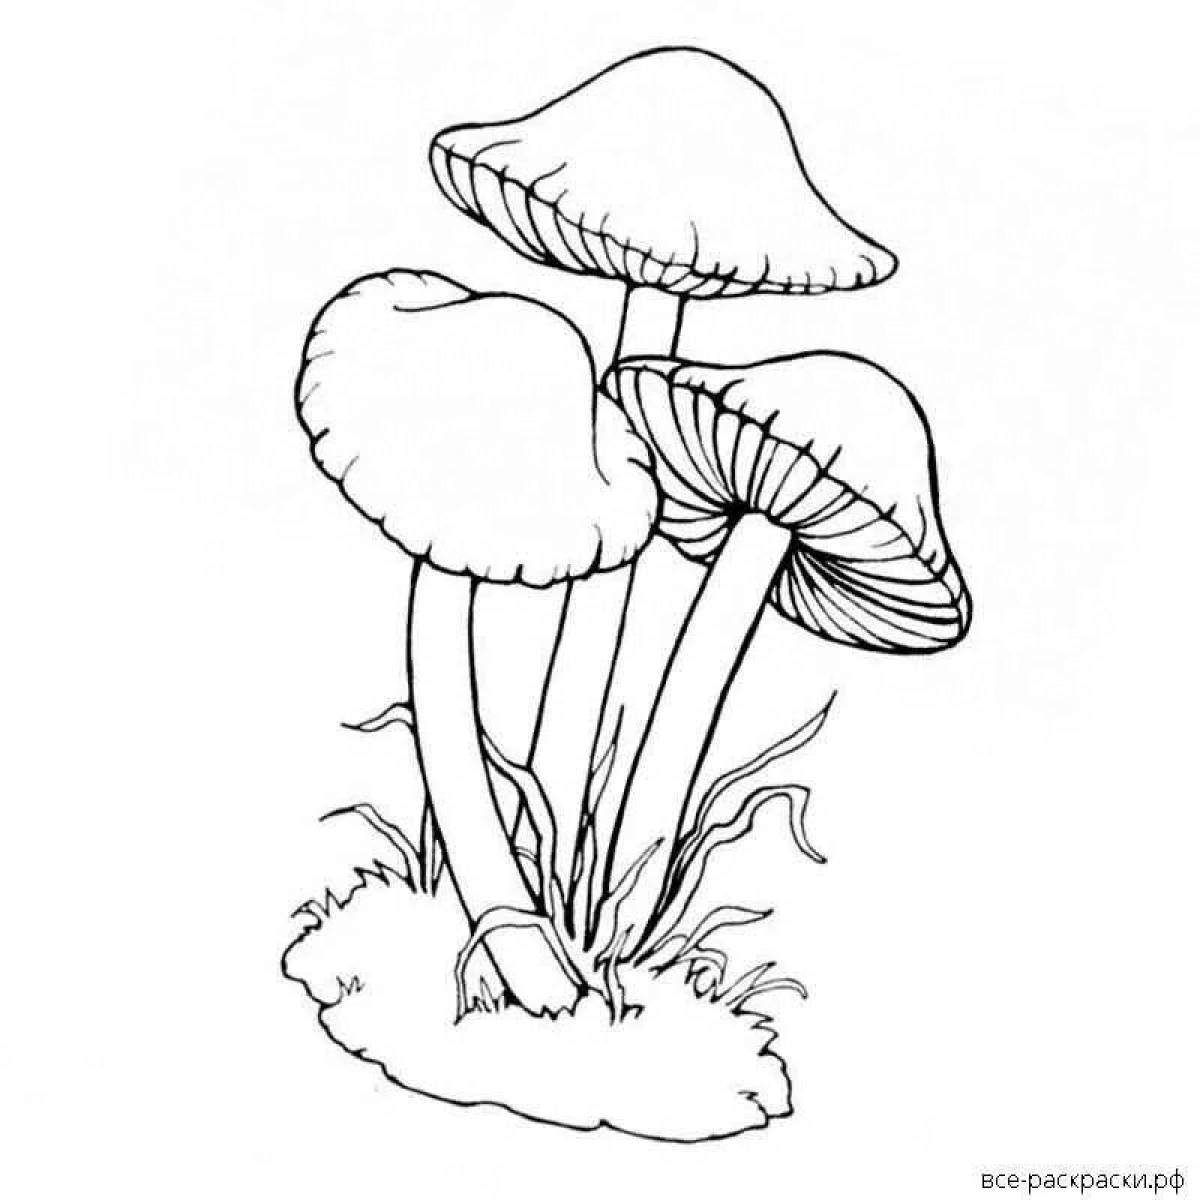 Colorful honey mushroom coloring page